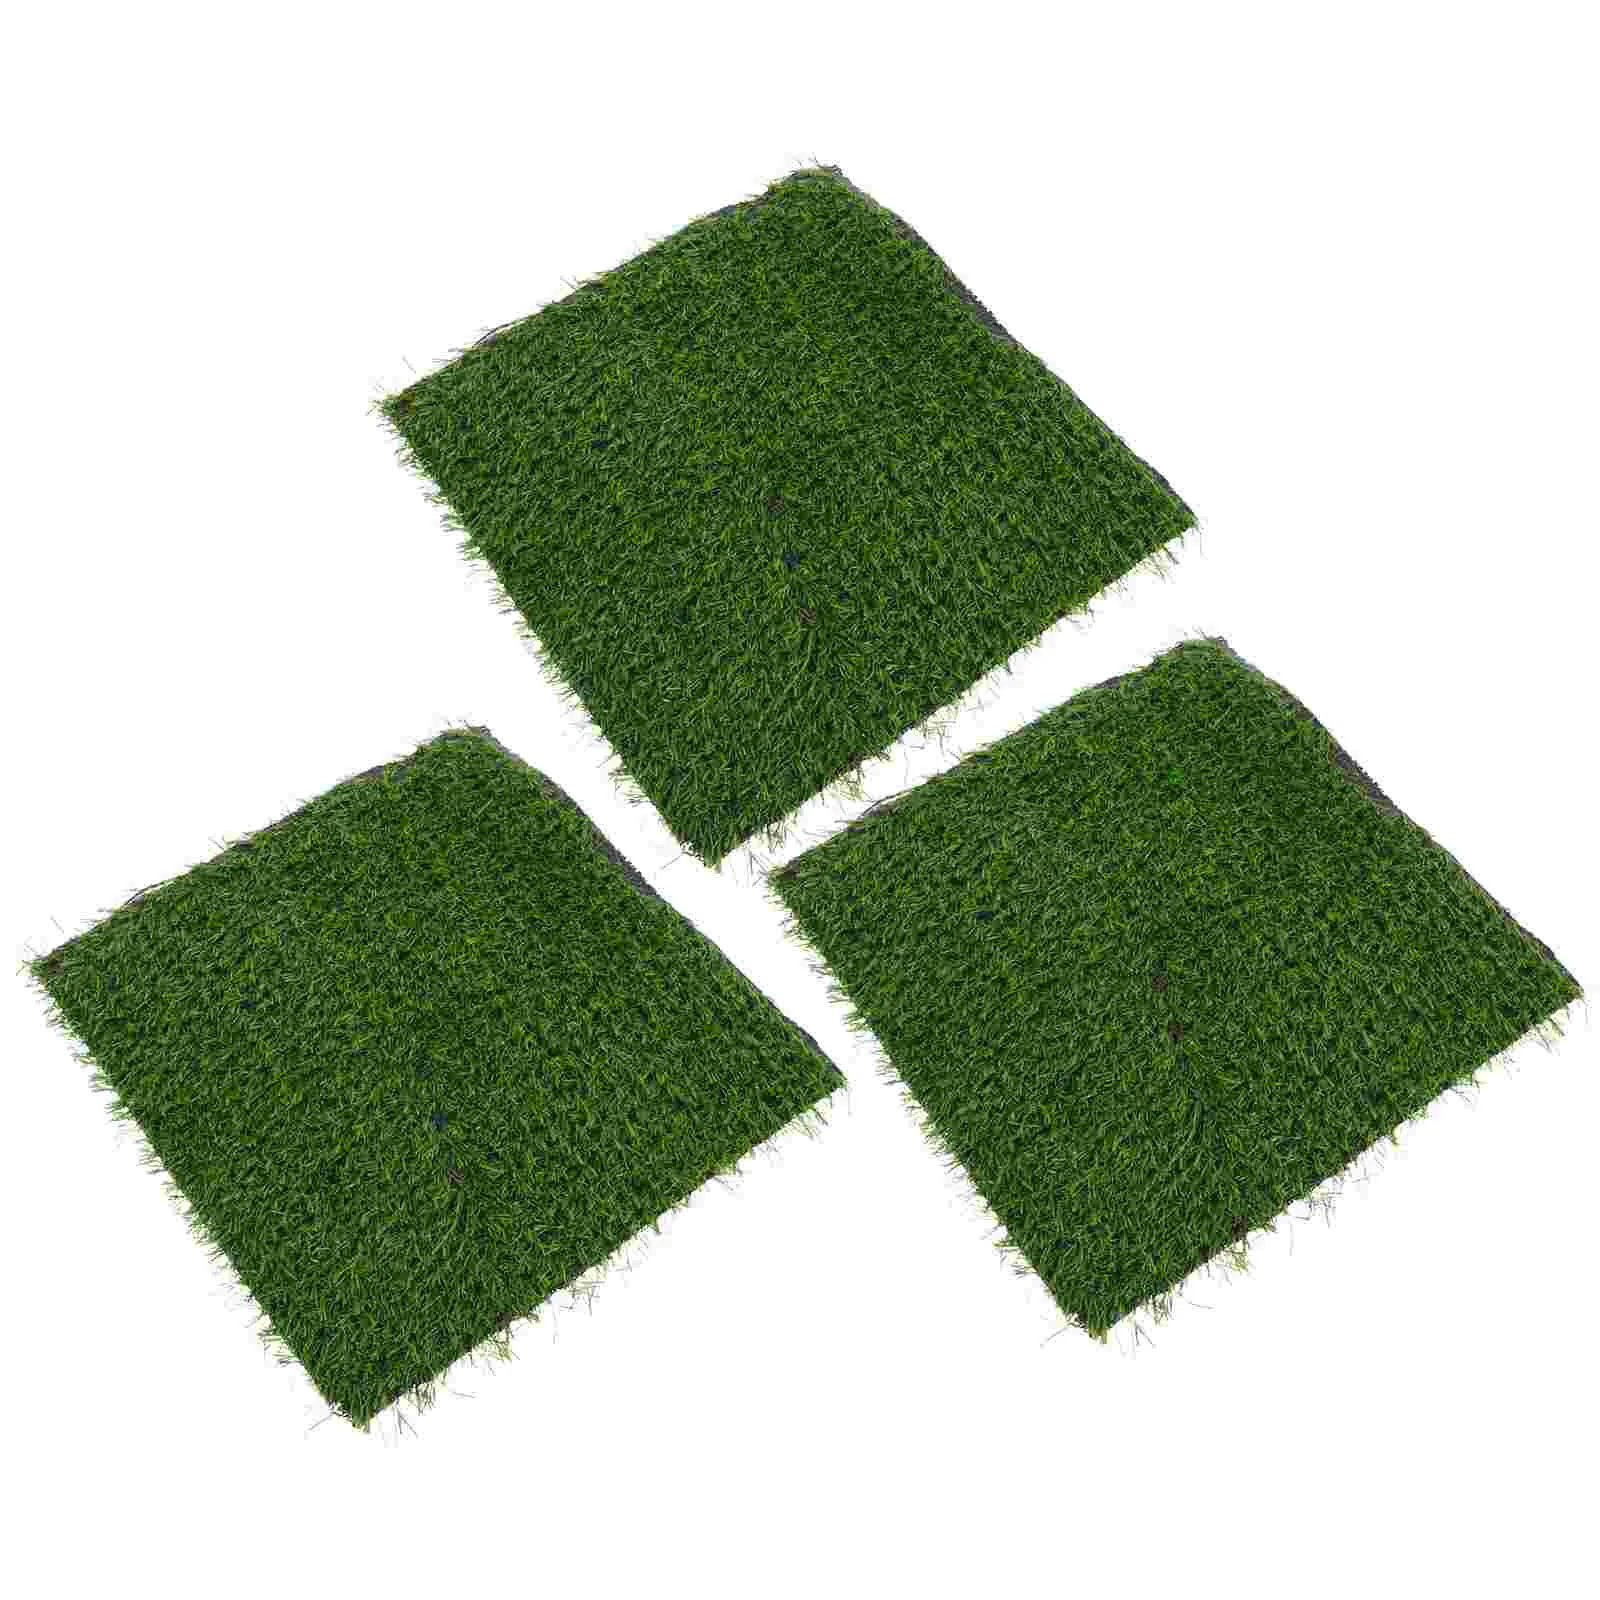 

Chicken Nesting Pads Box Mats Grass Coop Fake Turf Bedding Artificial Cushions Mat Washable Laying Boxes Poultry Cage Egg Liners